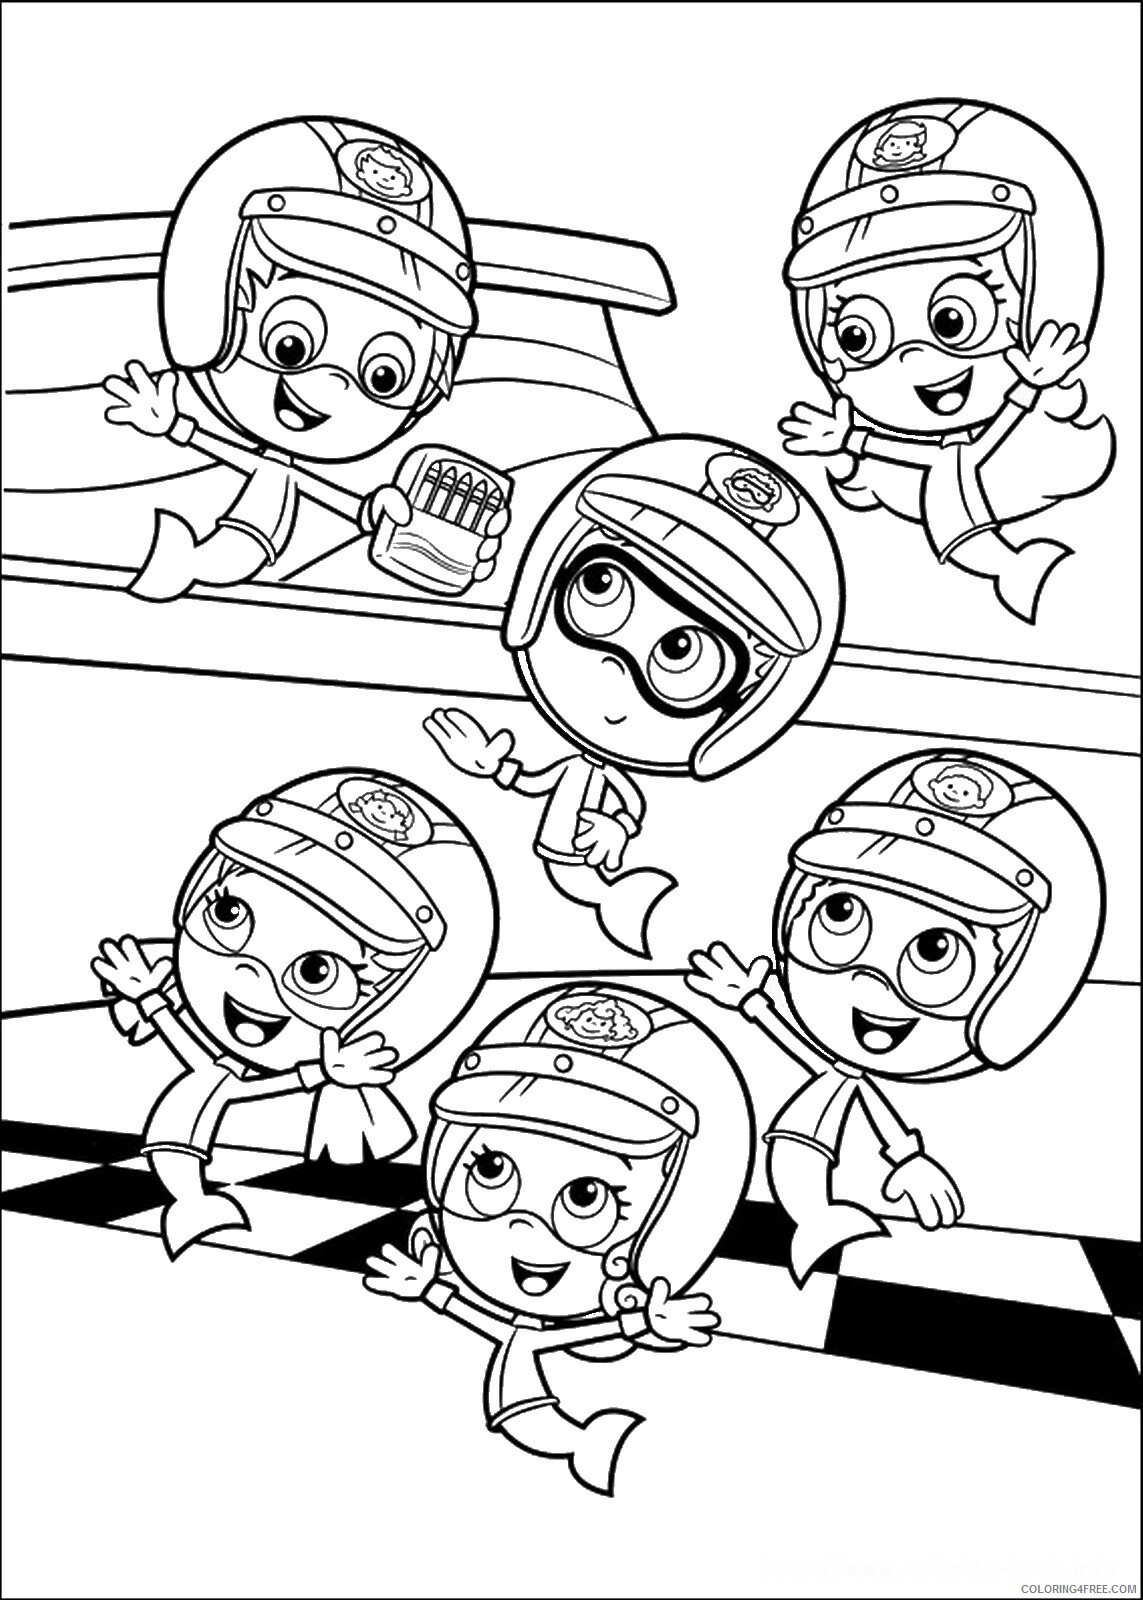 Bubble Guppies Coloring Pages TV Film Characters Printable 2020 01579 Coloring4free